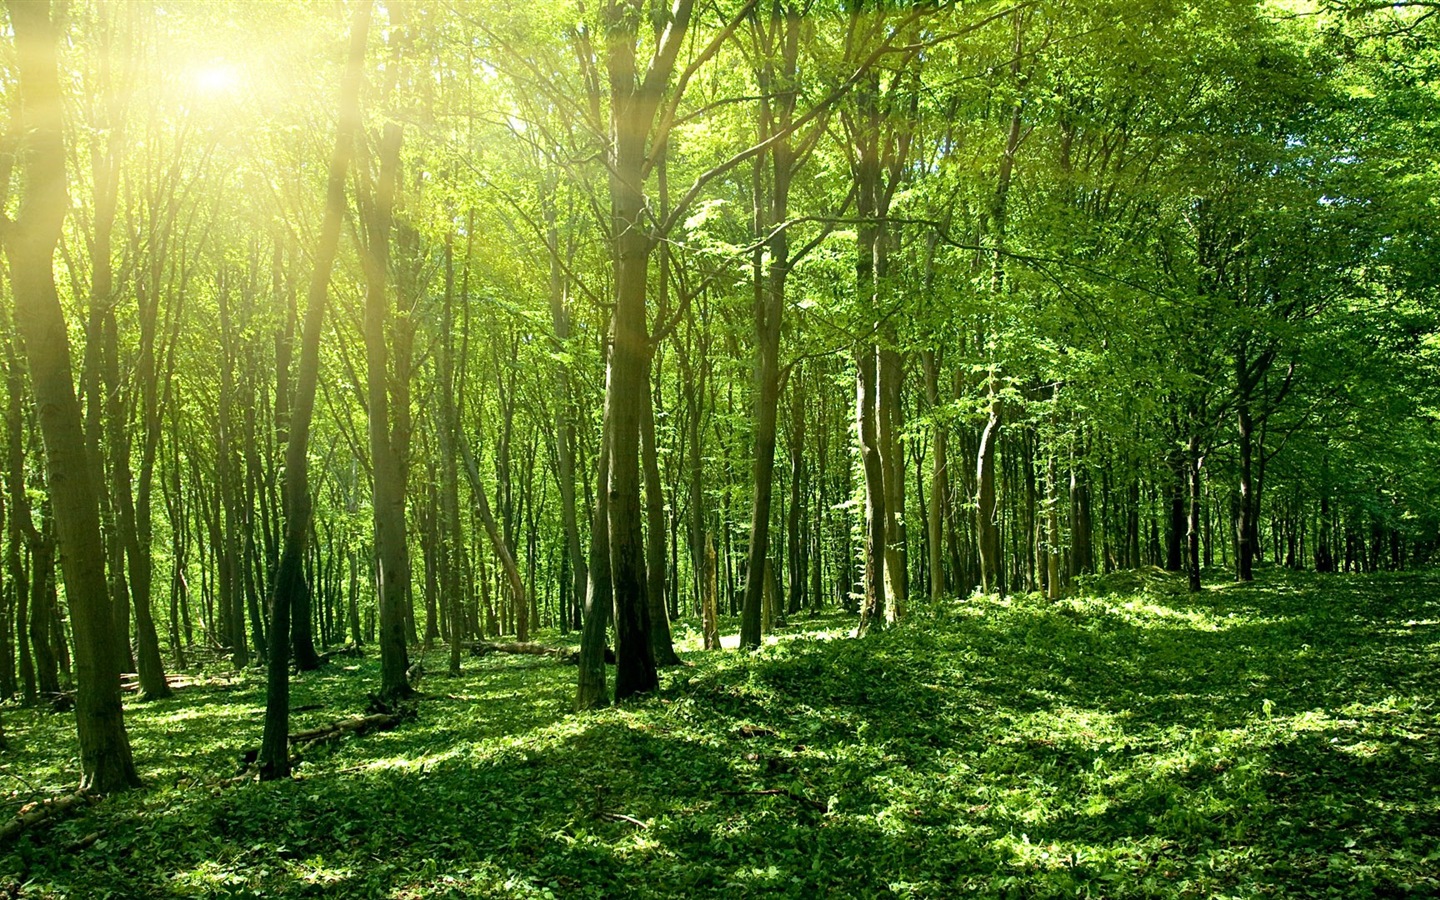 Windows 8 theme forest scenery HD wallpapers #3 - 1440x900